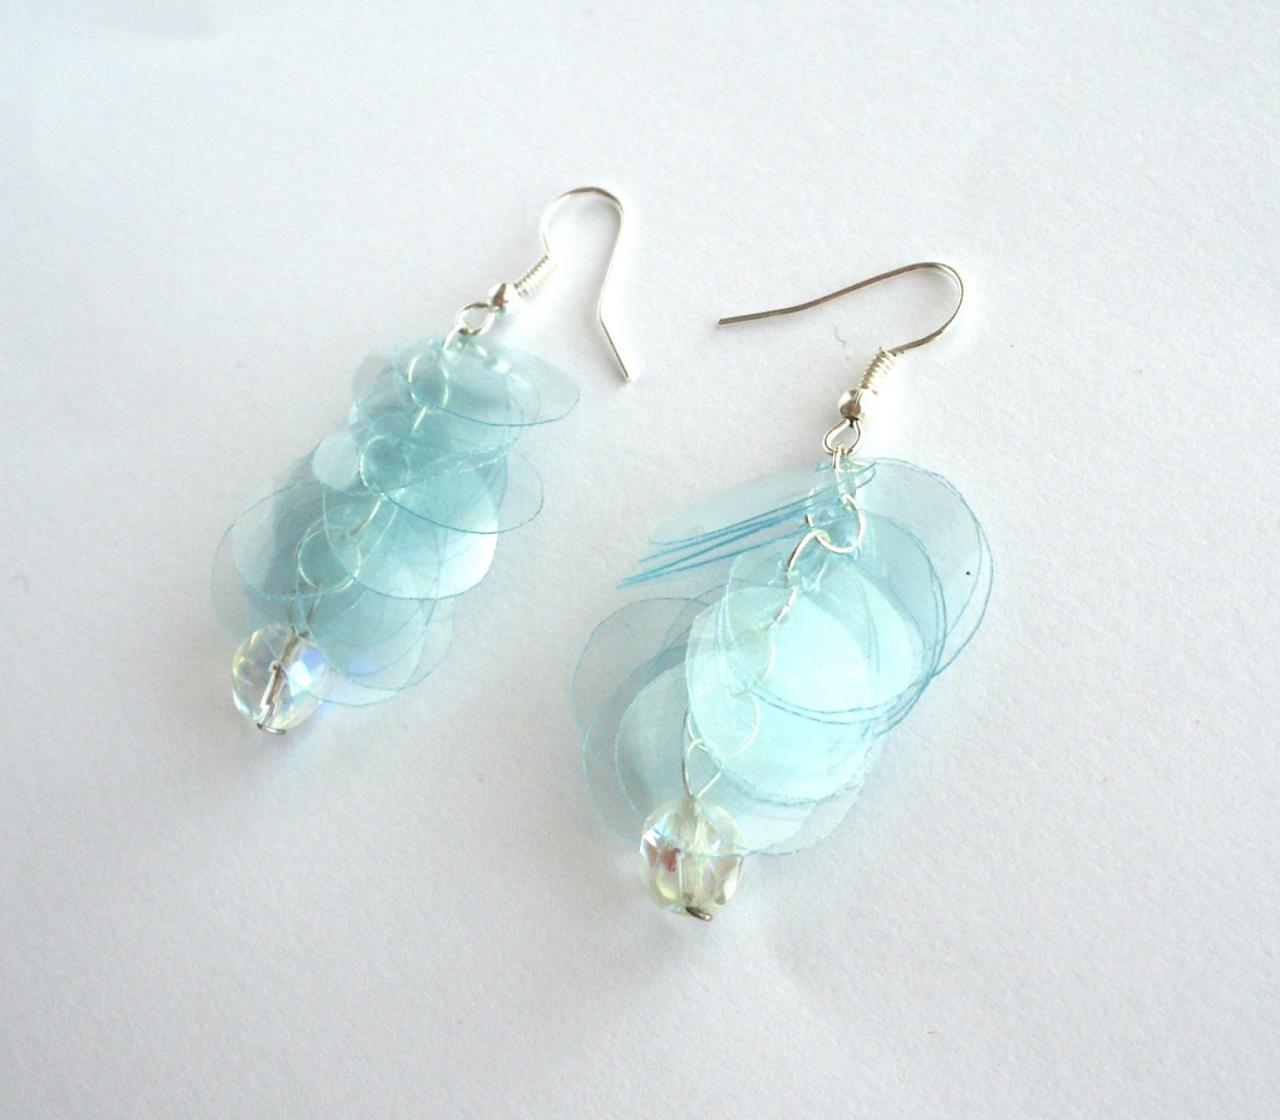 Lovely Mint Green Earrings Made Of Recycled Plastic Bottle & Repurposed Glass Bead - Upcycled Jewelry, Eco-friendly, Blue